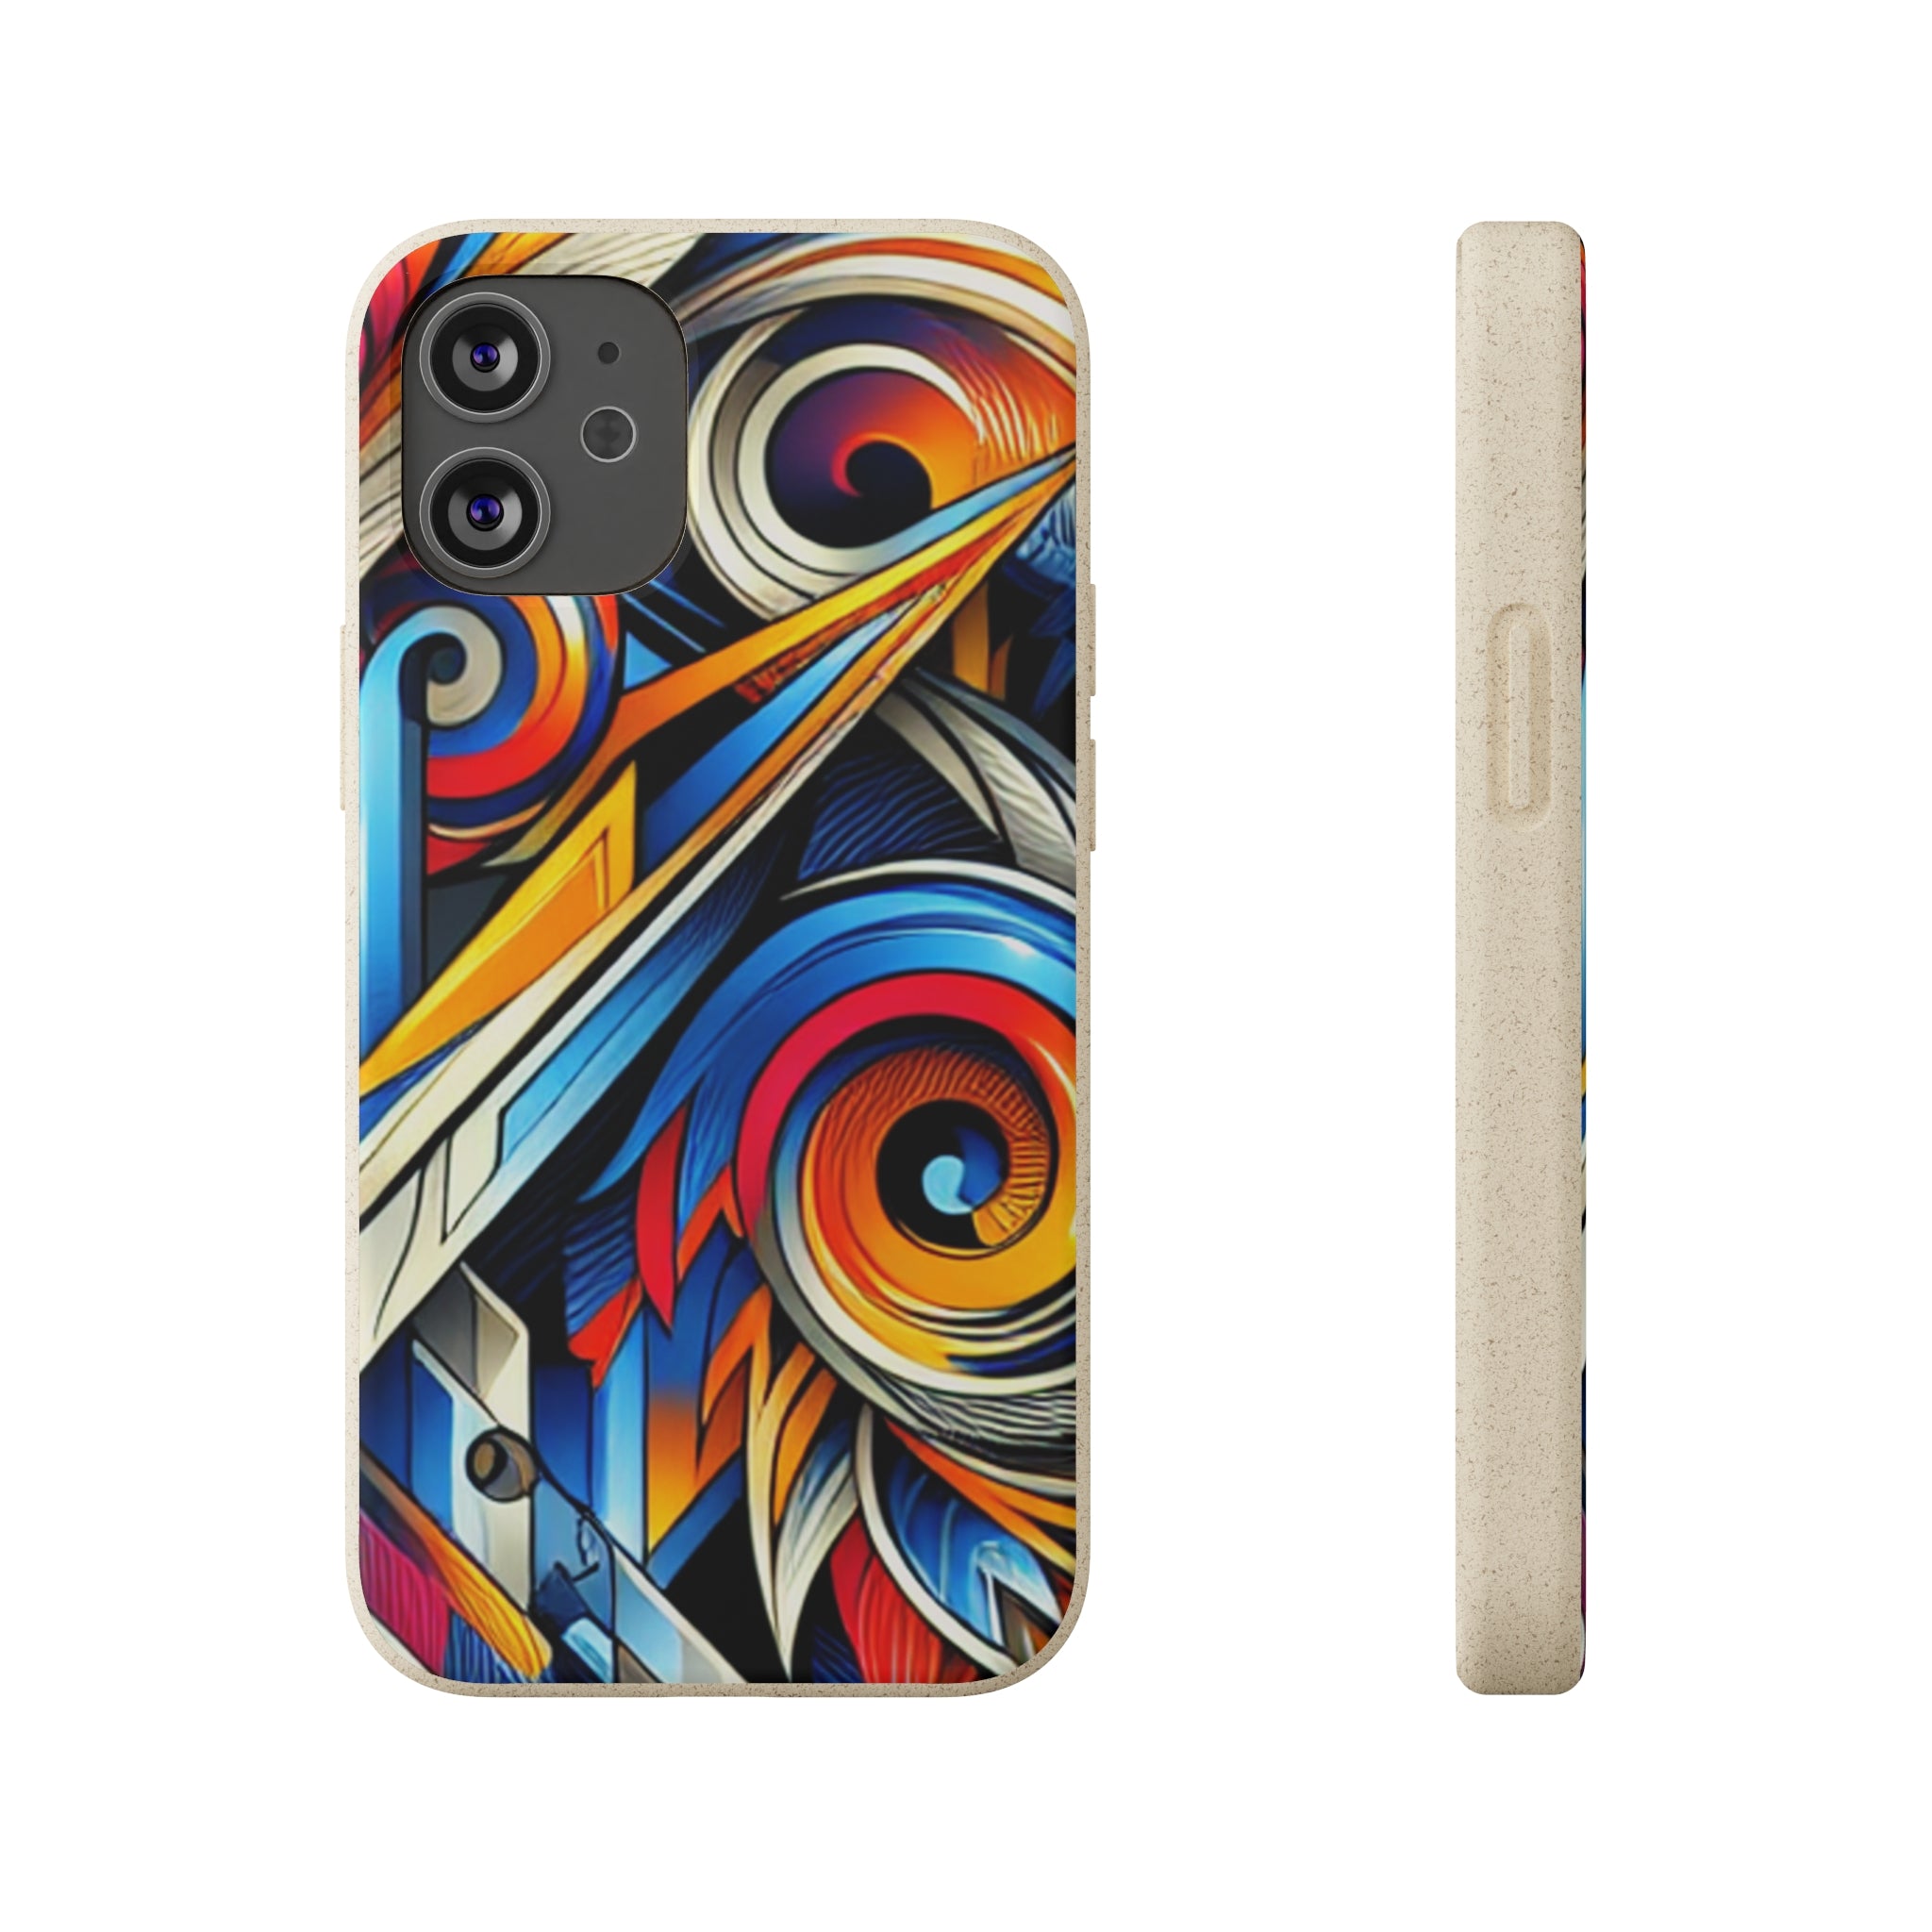 Sally Woodcraft - Biodegradable iPhone Cases